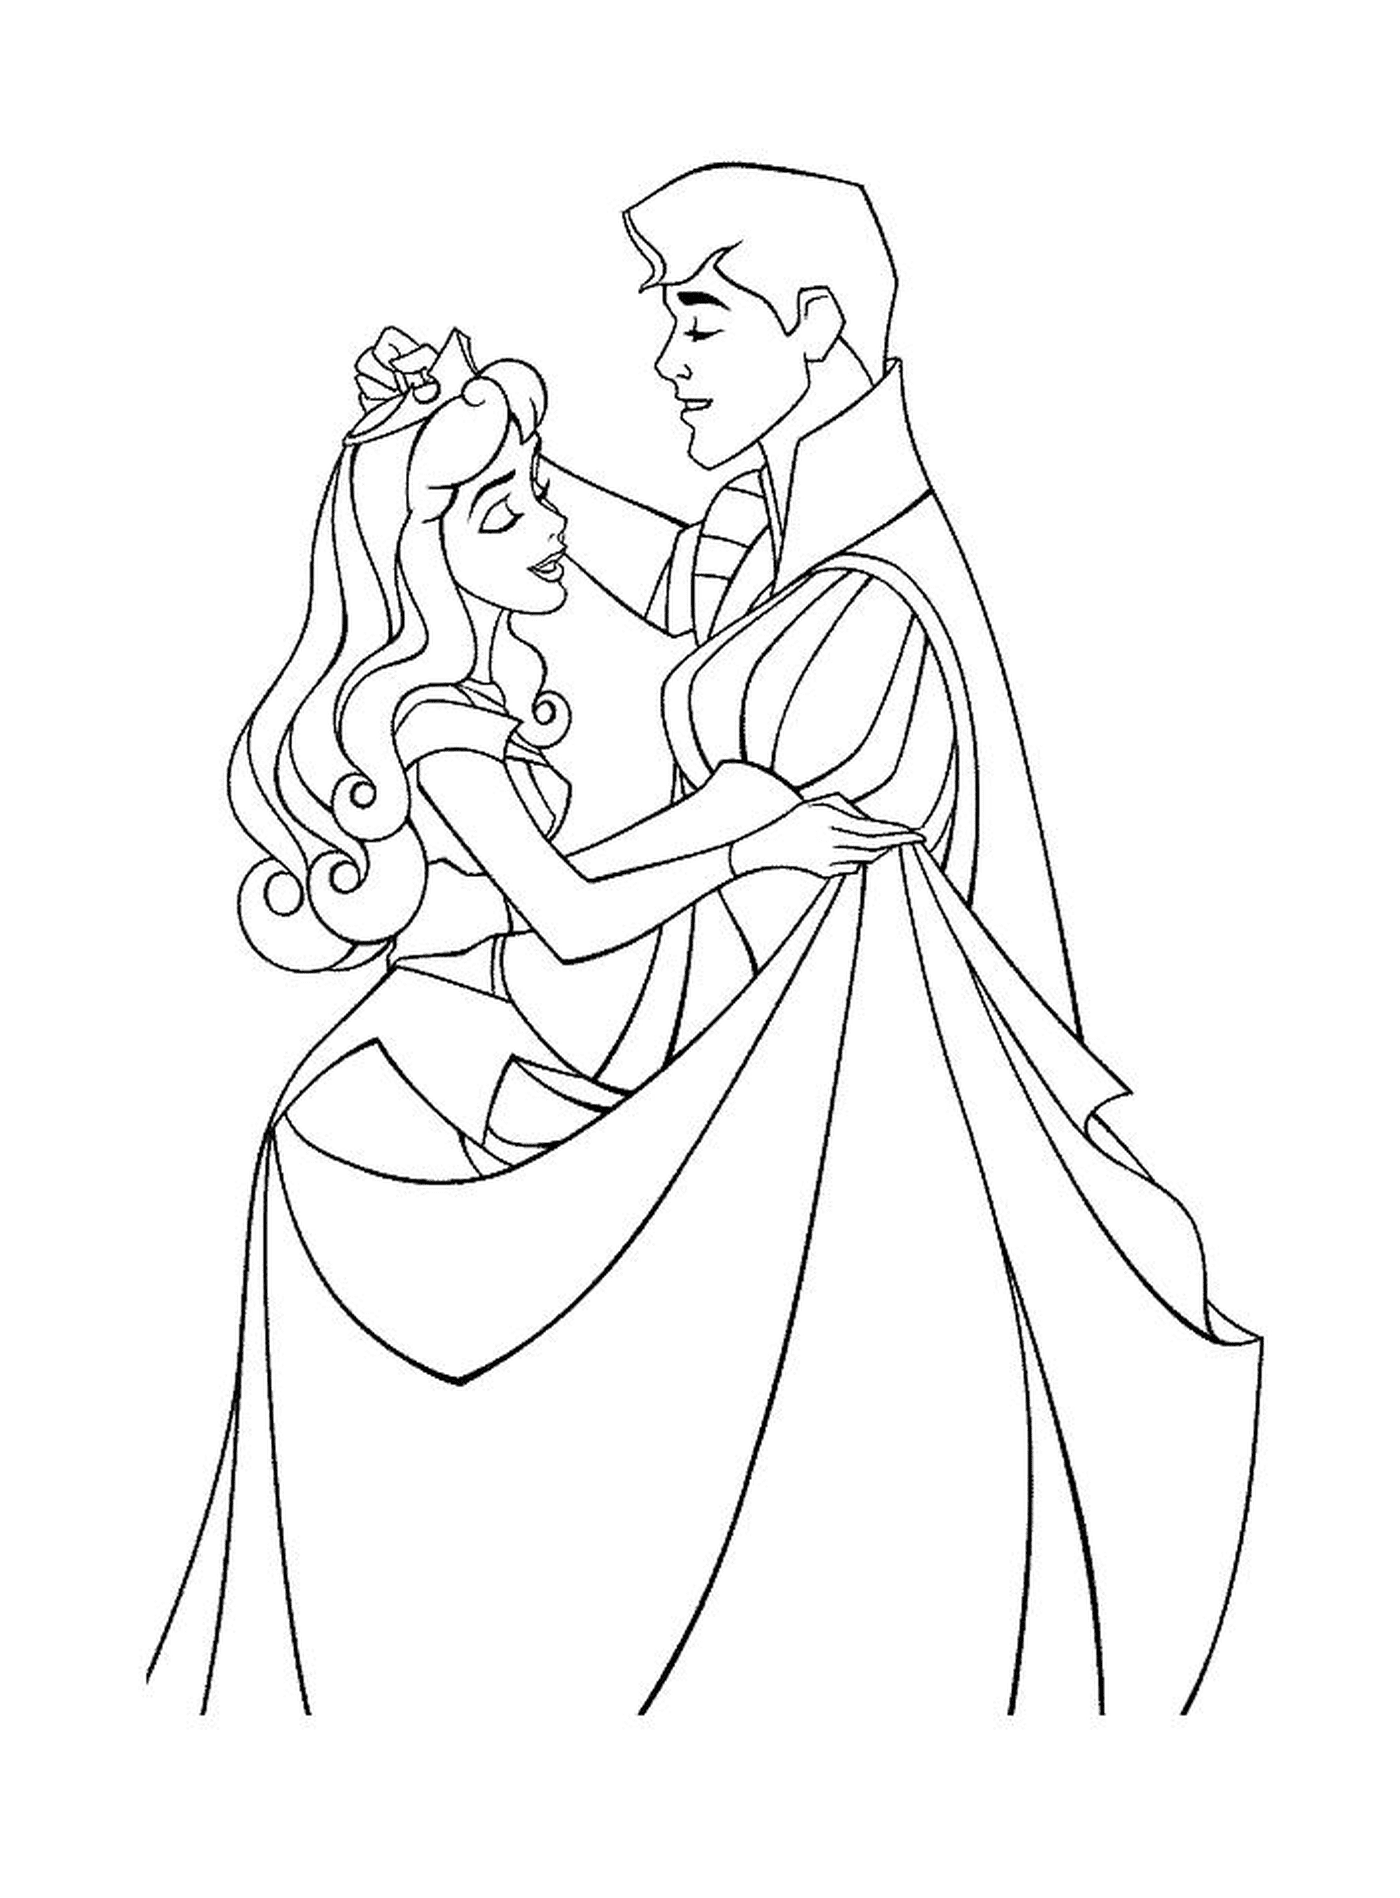  Aurore dances with her prince charming 